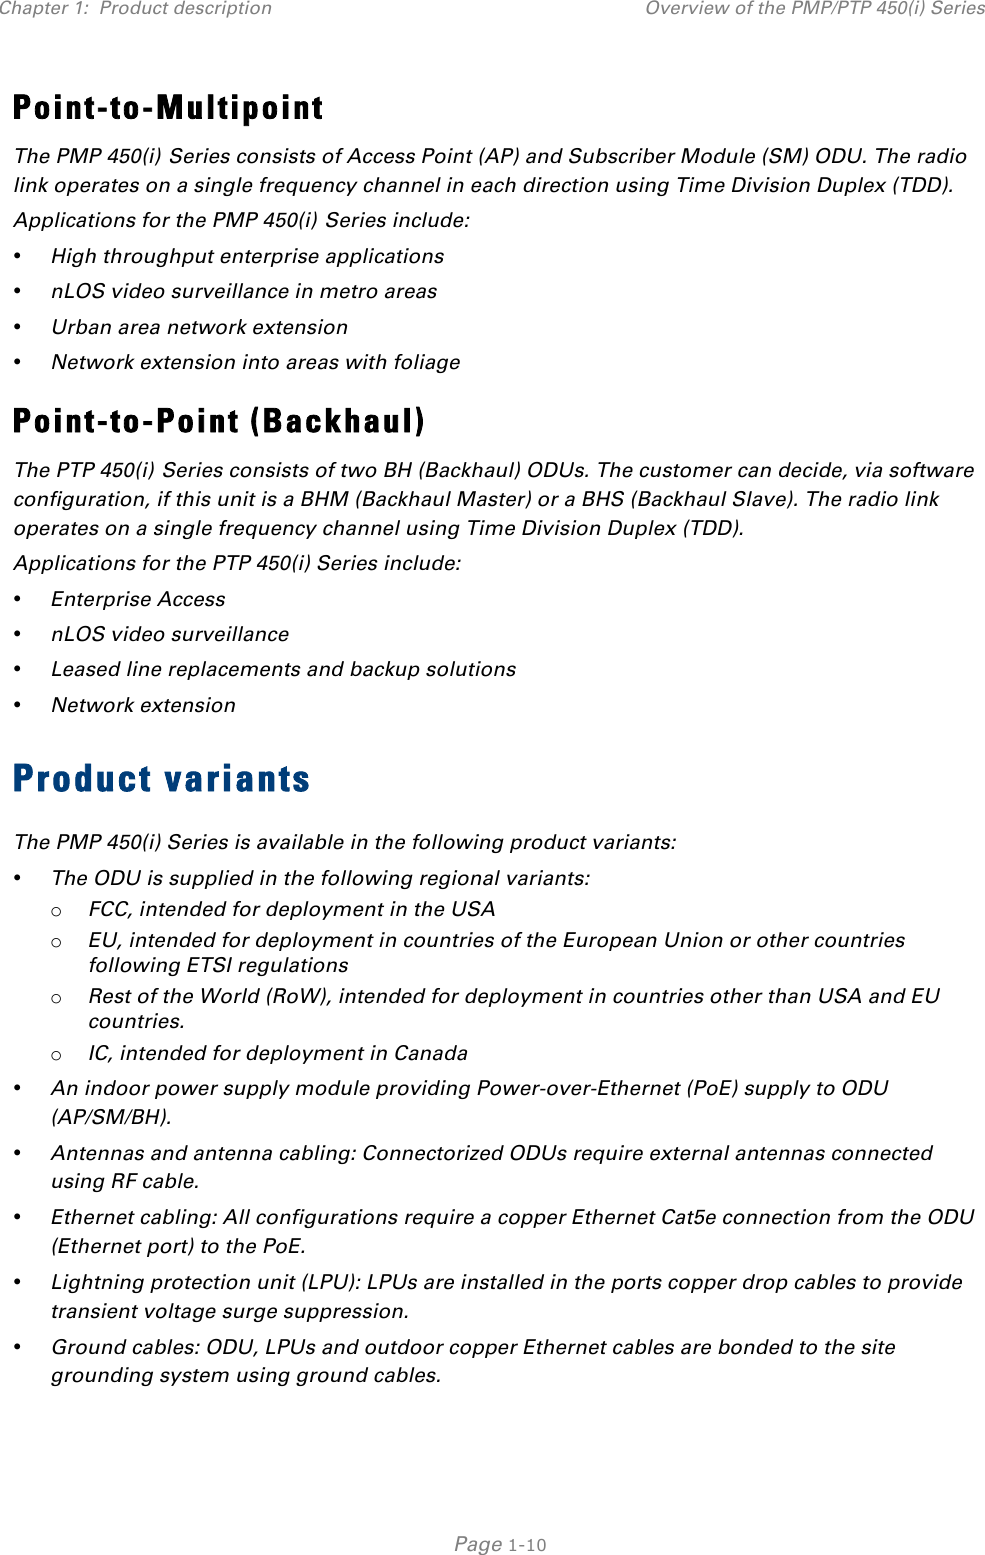 Chapter 1:  Product description Overview of the PMP/PTP 450(i) Series   Page 1-10 Point-to-Multipoint The PMP 450(i) Series consists of Access Point (AP) and Subscriber Module (SM) ODU. The radio link operates on a single frequency channel in each direction using Time Division Duplex (TDD). Applications for the PMP 450(i) Series include: • High throughput enterprise applications • nLOS video surveillance in metro areas • Urban area network extension • Network extension into areas with foliage Point-to-Point (Backhaul) The PTP 450(i) Series consists of two BH (Backhaul) ODUs. The customer can decide, via software configuration, if this unit is a BHM (Backhaul Master) or a BHS (Backhaul Slave). The radio link operates on a single frequency channel using Time Division Duplex (TDD). Applications for the PTP 450(i) Series include: • Enterprise Access • nLOS video surveillance • Leased line replacements and backup solutions • Network extension Product variants The PMP 450(i) Series is available in the following product variants: • The ODU is supplied in the following regional variants: o FCC, intended for deployment in the USA o EU, intended for deployment in countries of the European Union or other countries following ETSI regulations o Rest of the World (RoW), intended for deployment in countries other than USA and EU countries. o IC, intended for deployment in Canada • An indoor power supply module providing Power-over-Ethernet (PoE) supply to ODU (AP/SM/BH). • Antennas and antenna cabling: Connectorized ODUs require external antennas connected using RF cable. • Ethernet cabling: All configurations require a copper Ethernet Cat5e connection from the ODU (Ethernet port) to the PoE.  • Lightning protection unit (LPU): LPUs are installed in the ports copper drop cables to provide transient voltage surge suppression. • Ground cables: ODU, LPUs and outdoor copper Ethernet cables are bonded to the site grounding system using ground cables. 